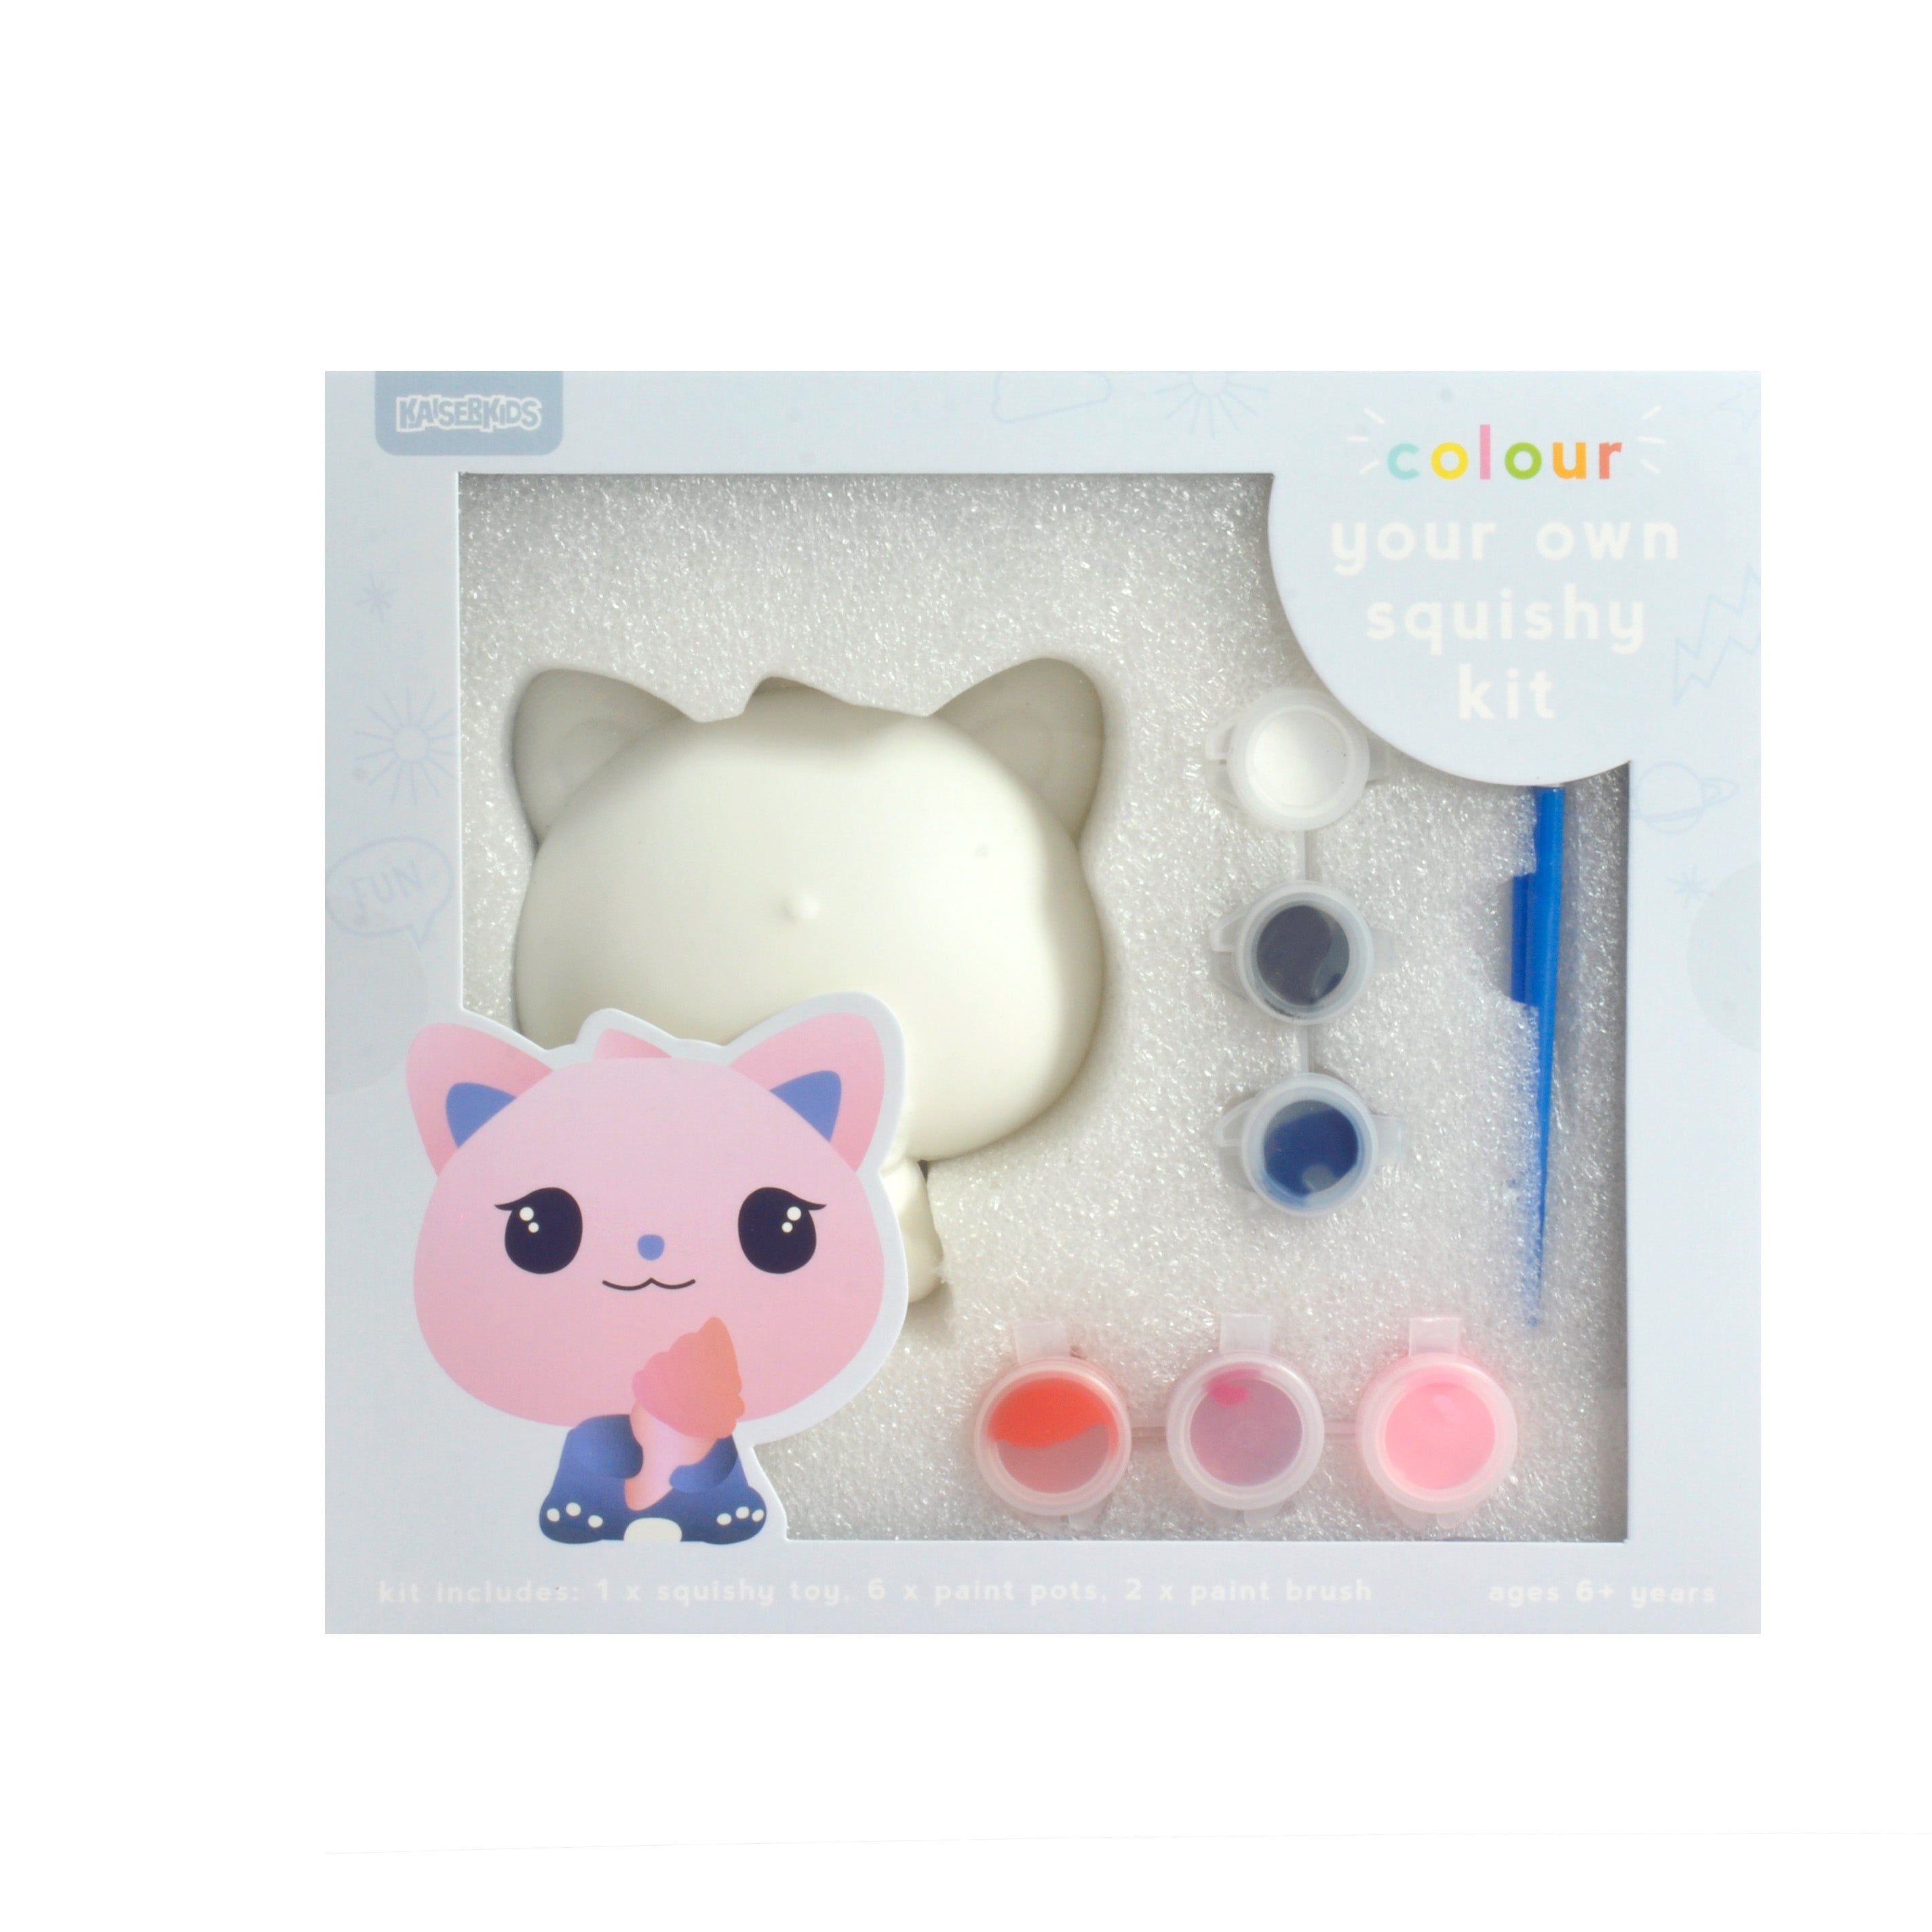 Colour your Own Squishies Kit - CAT